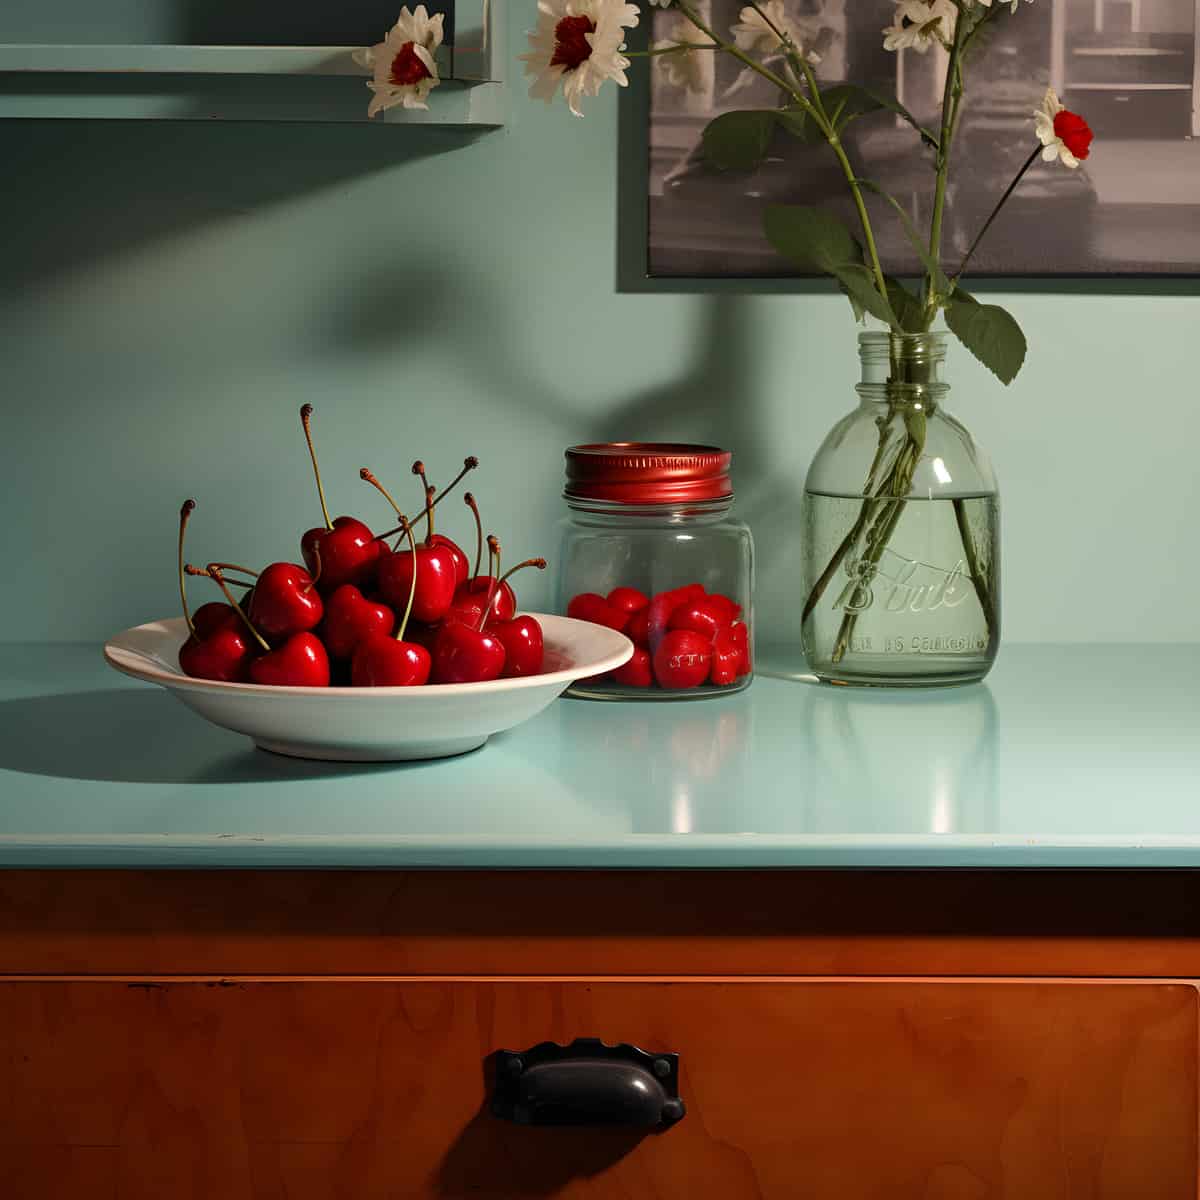 Cherry Of The Rio Grande on a kitchen counter